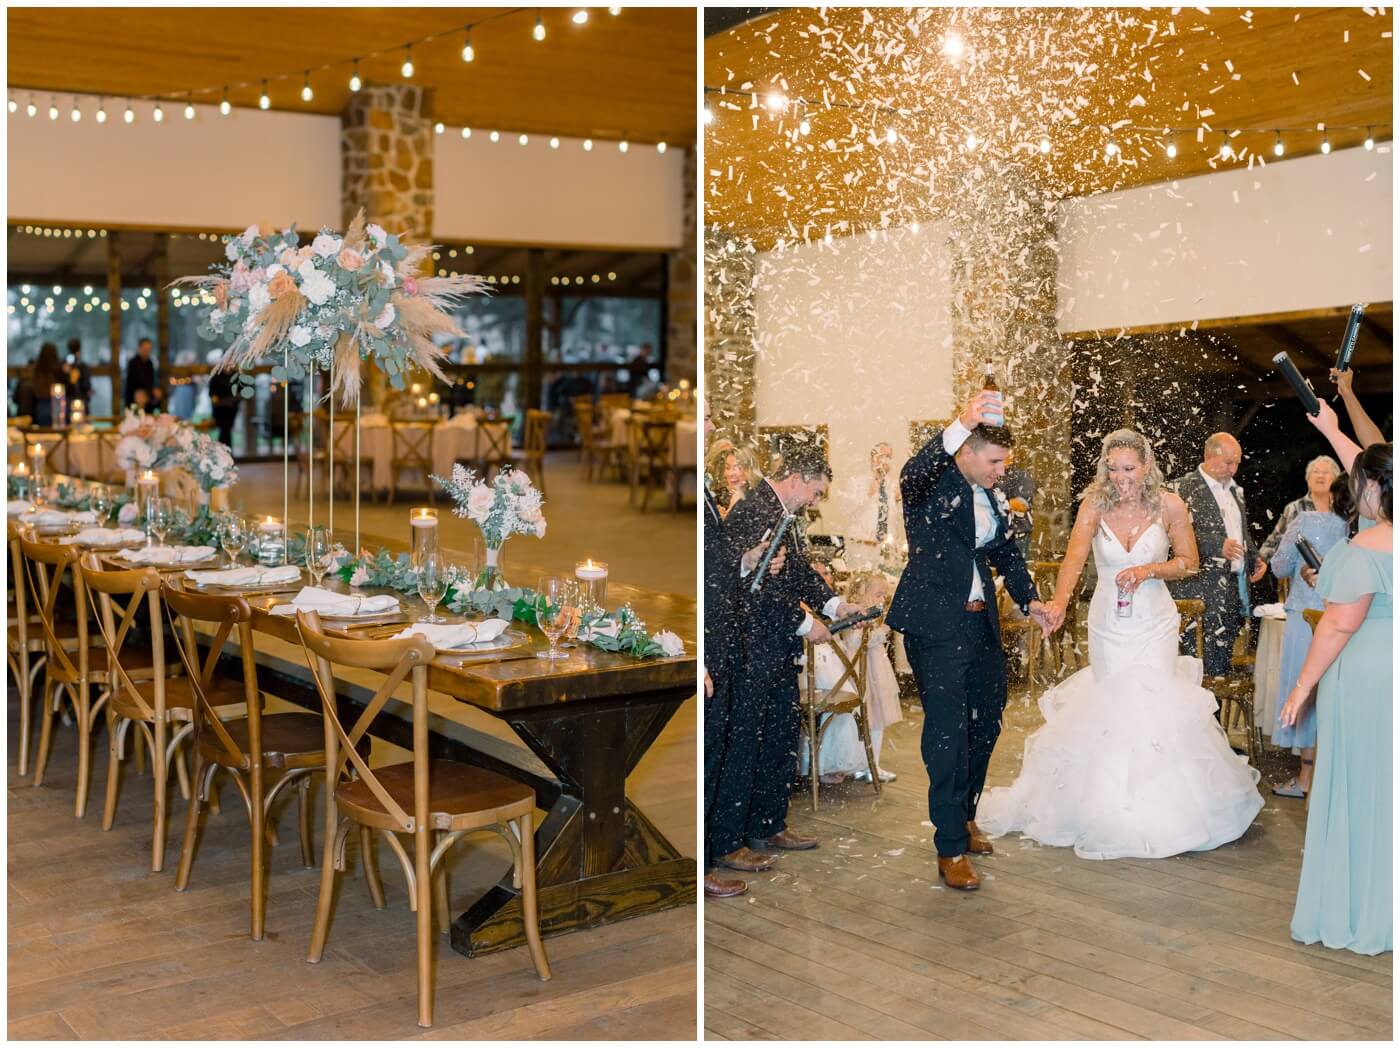 Houston Wedding at The Vine | confetti cannons go off during the grand entrance